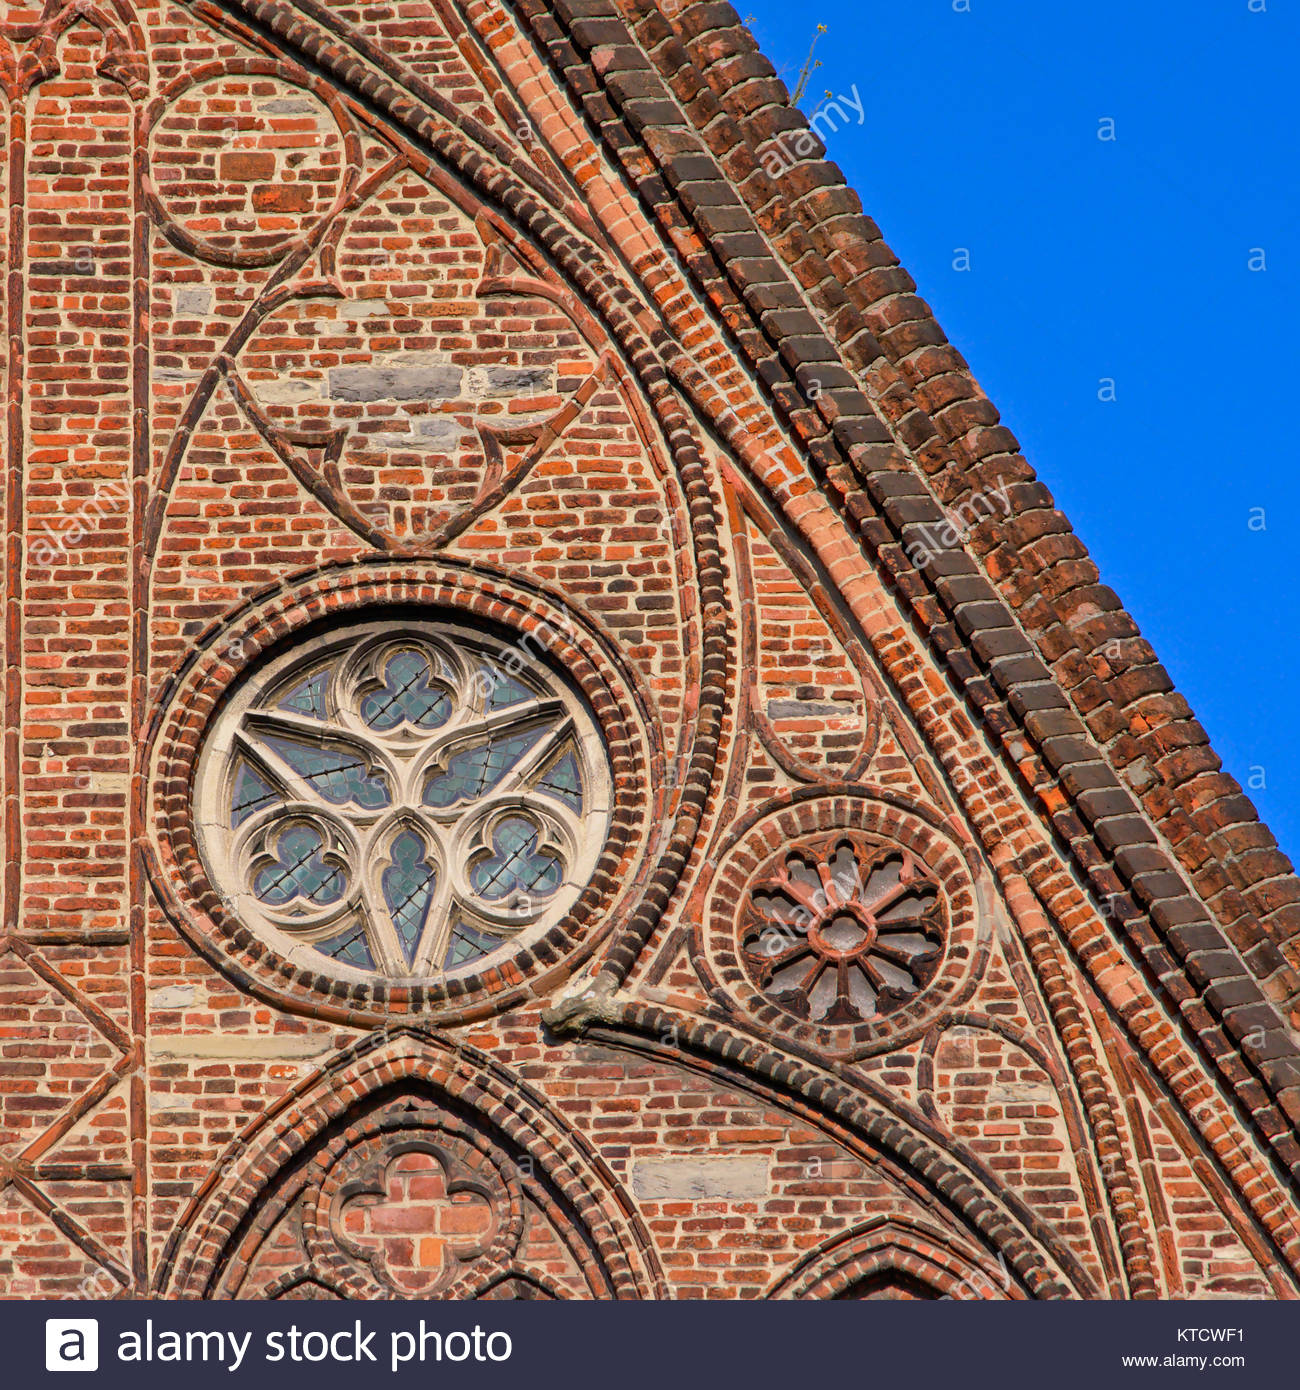 https://c8.alamy.com/comp/KTCWF1/rosette-window-and-decorated-brick-wall-part-of-the-gothic-church-KTCWF1.jpg